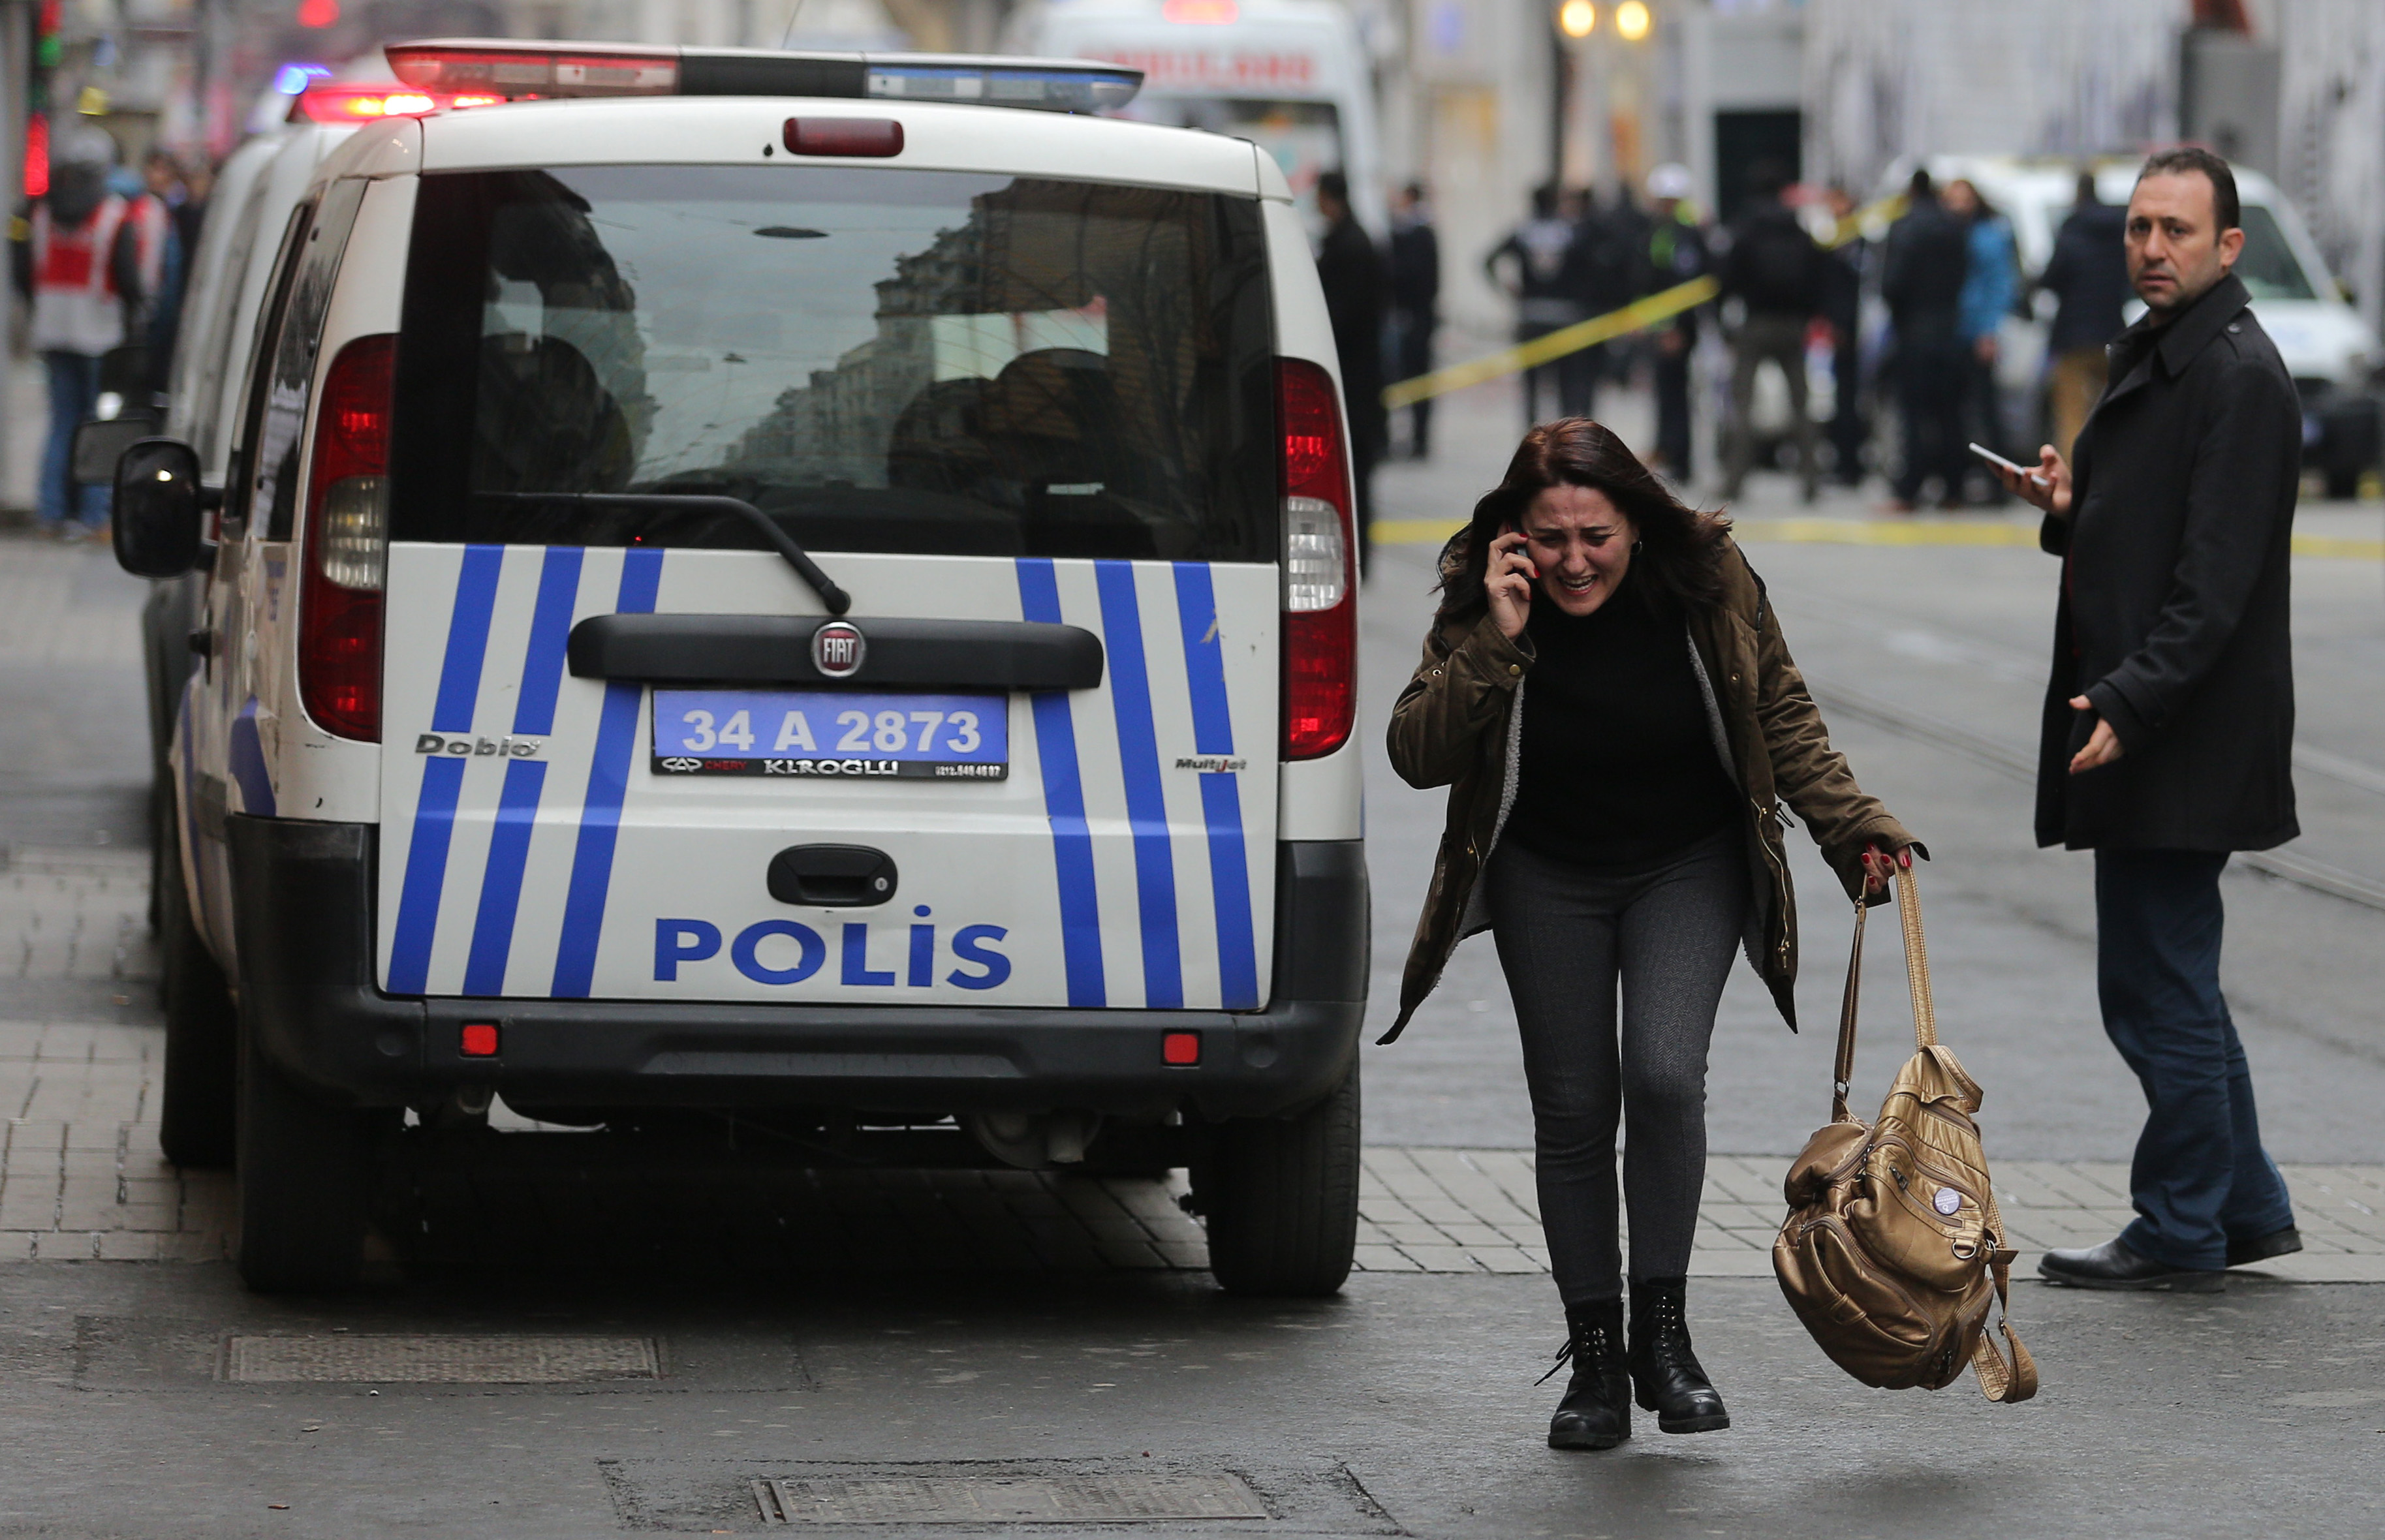 A woman reacts following a suicide bombing in a major shopping and tourist district in central Istanbul March 19, 2016.   REUTERS/Kemal Aslan TPX IMAGES OF THE DAY   - RTSB6I4